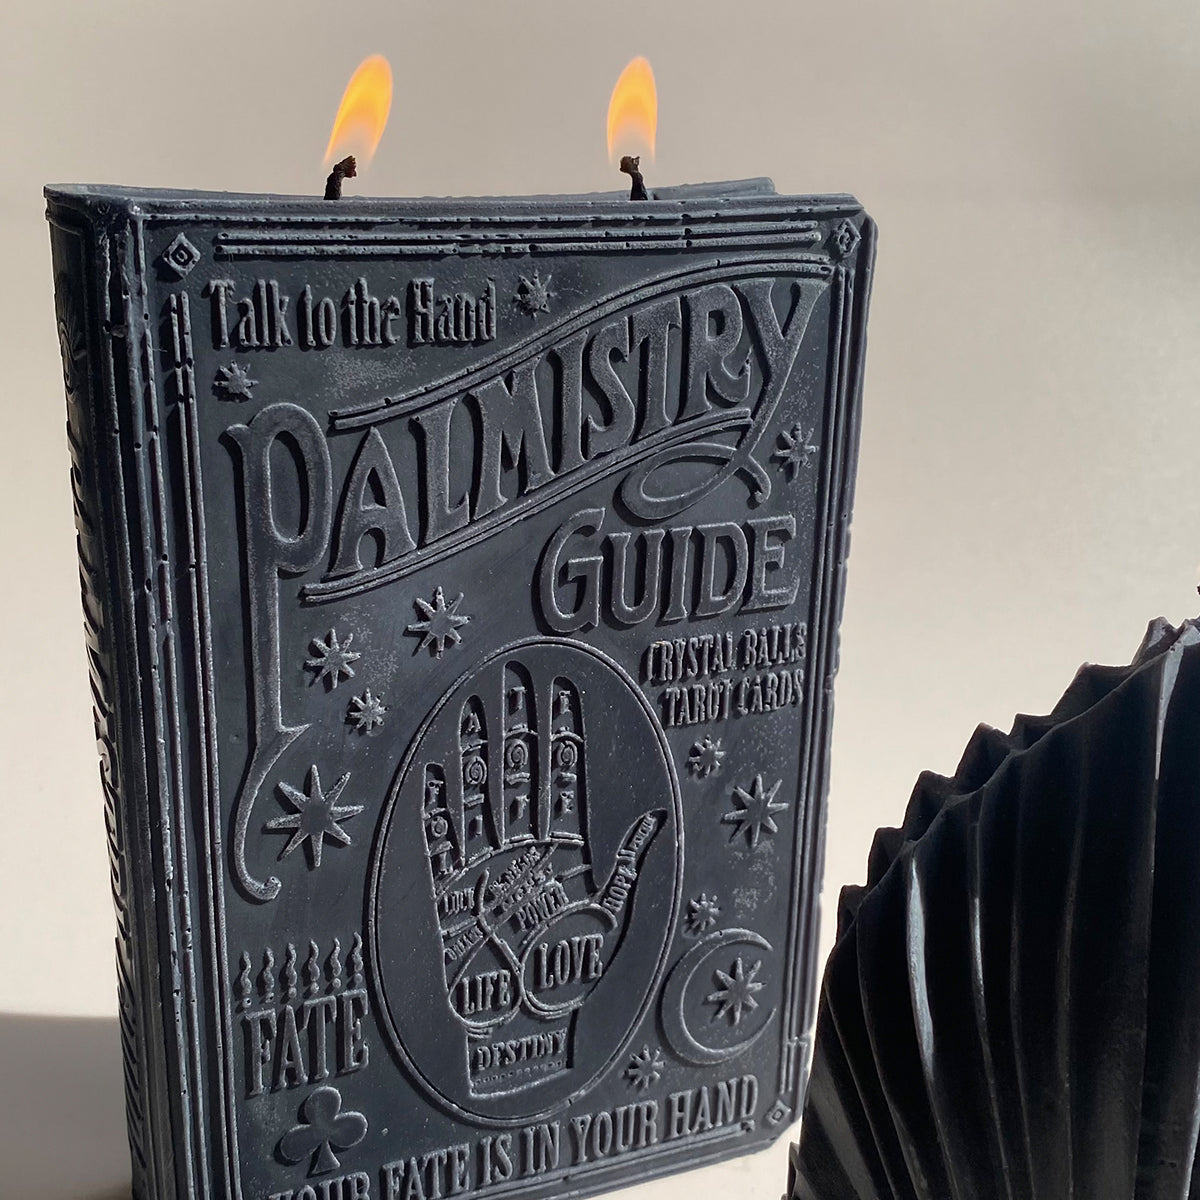 Palmistry Candle Book